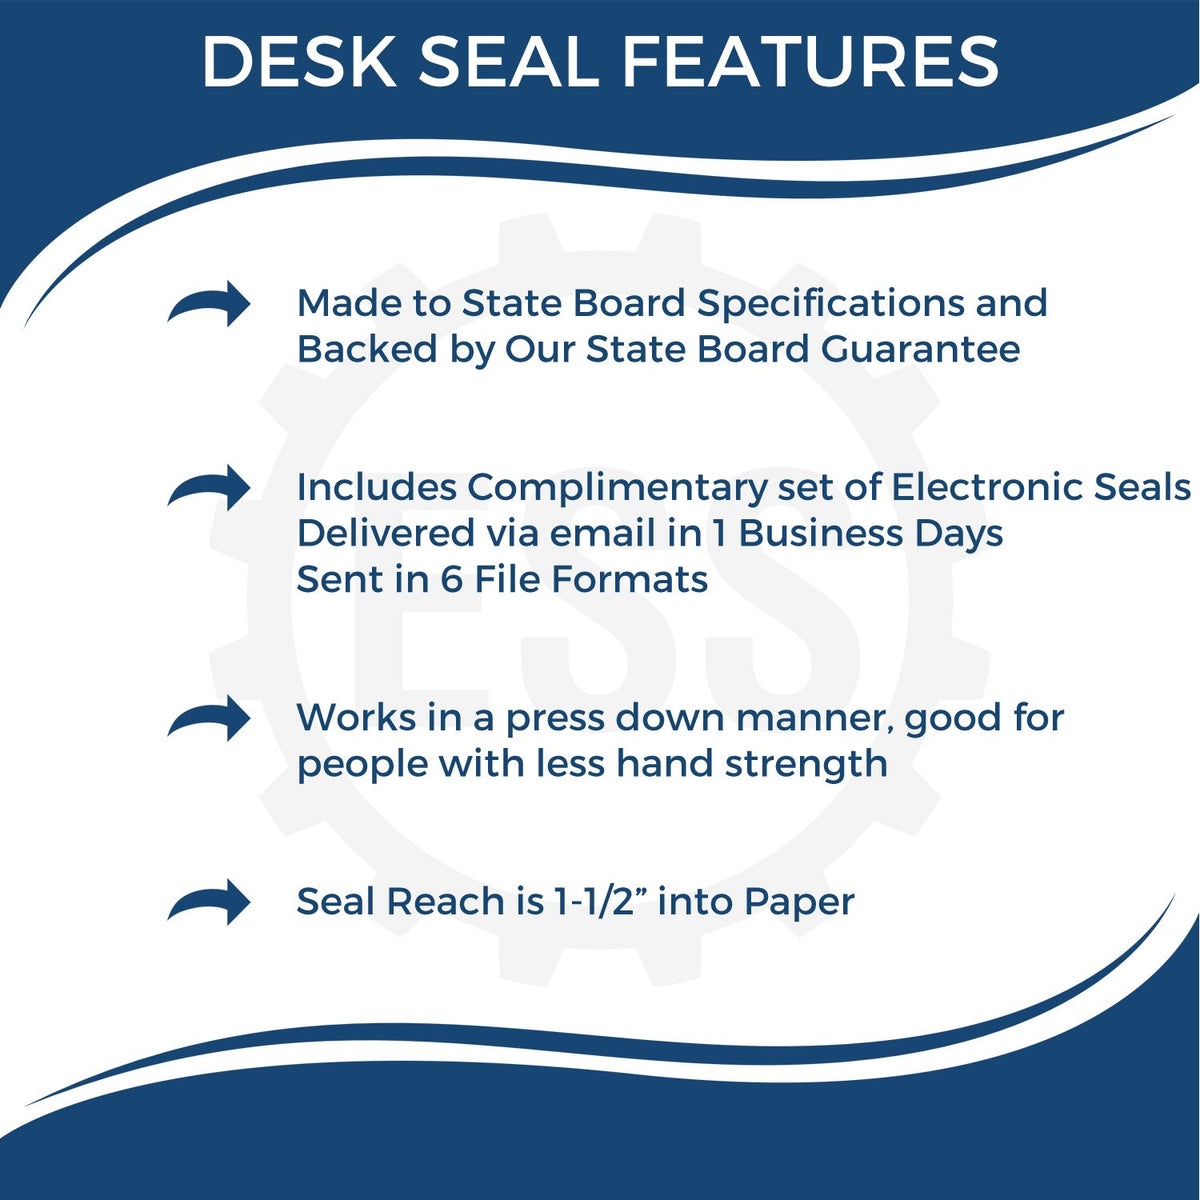 A picture of an infographic highlighting the selling points for the Hawaii Geologist Desk Seal